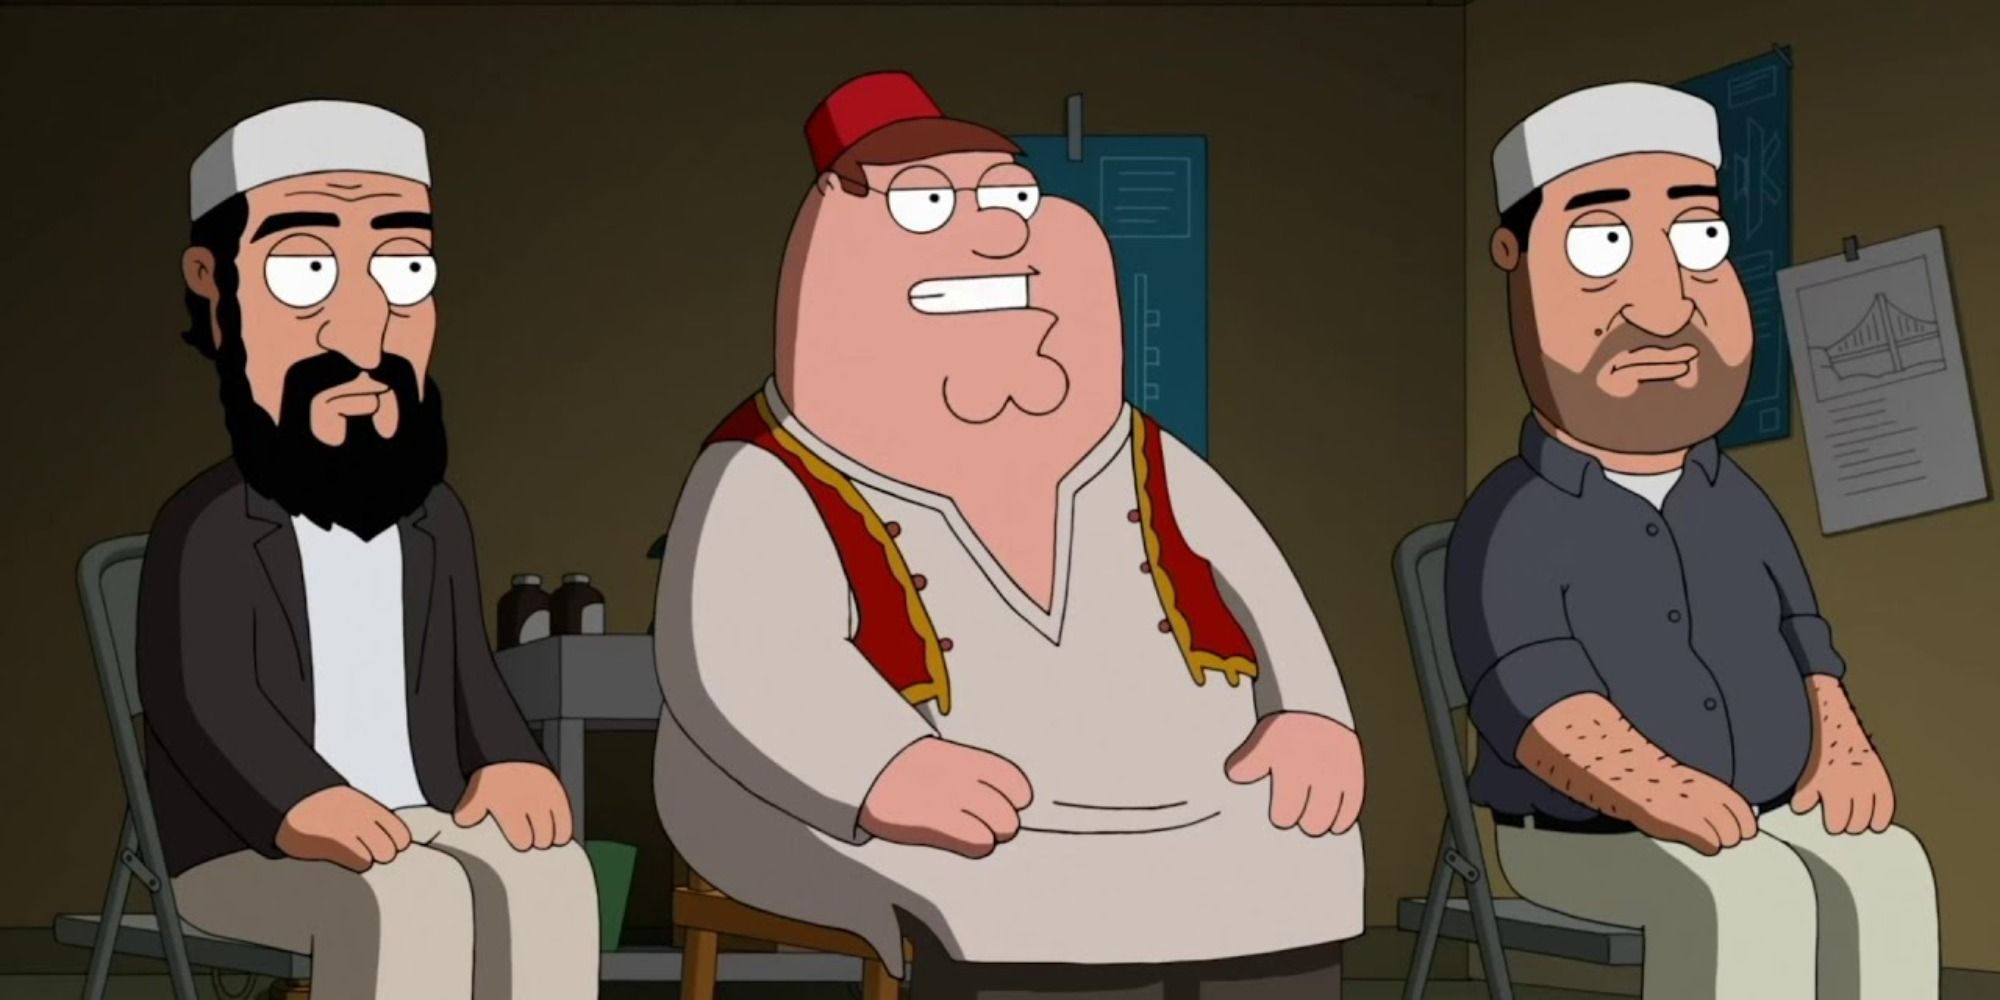 Peter sitting between two other characters